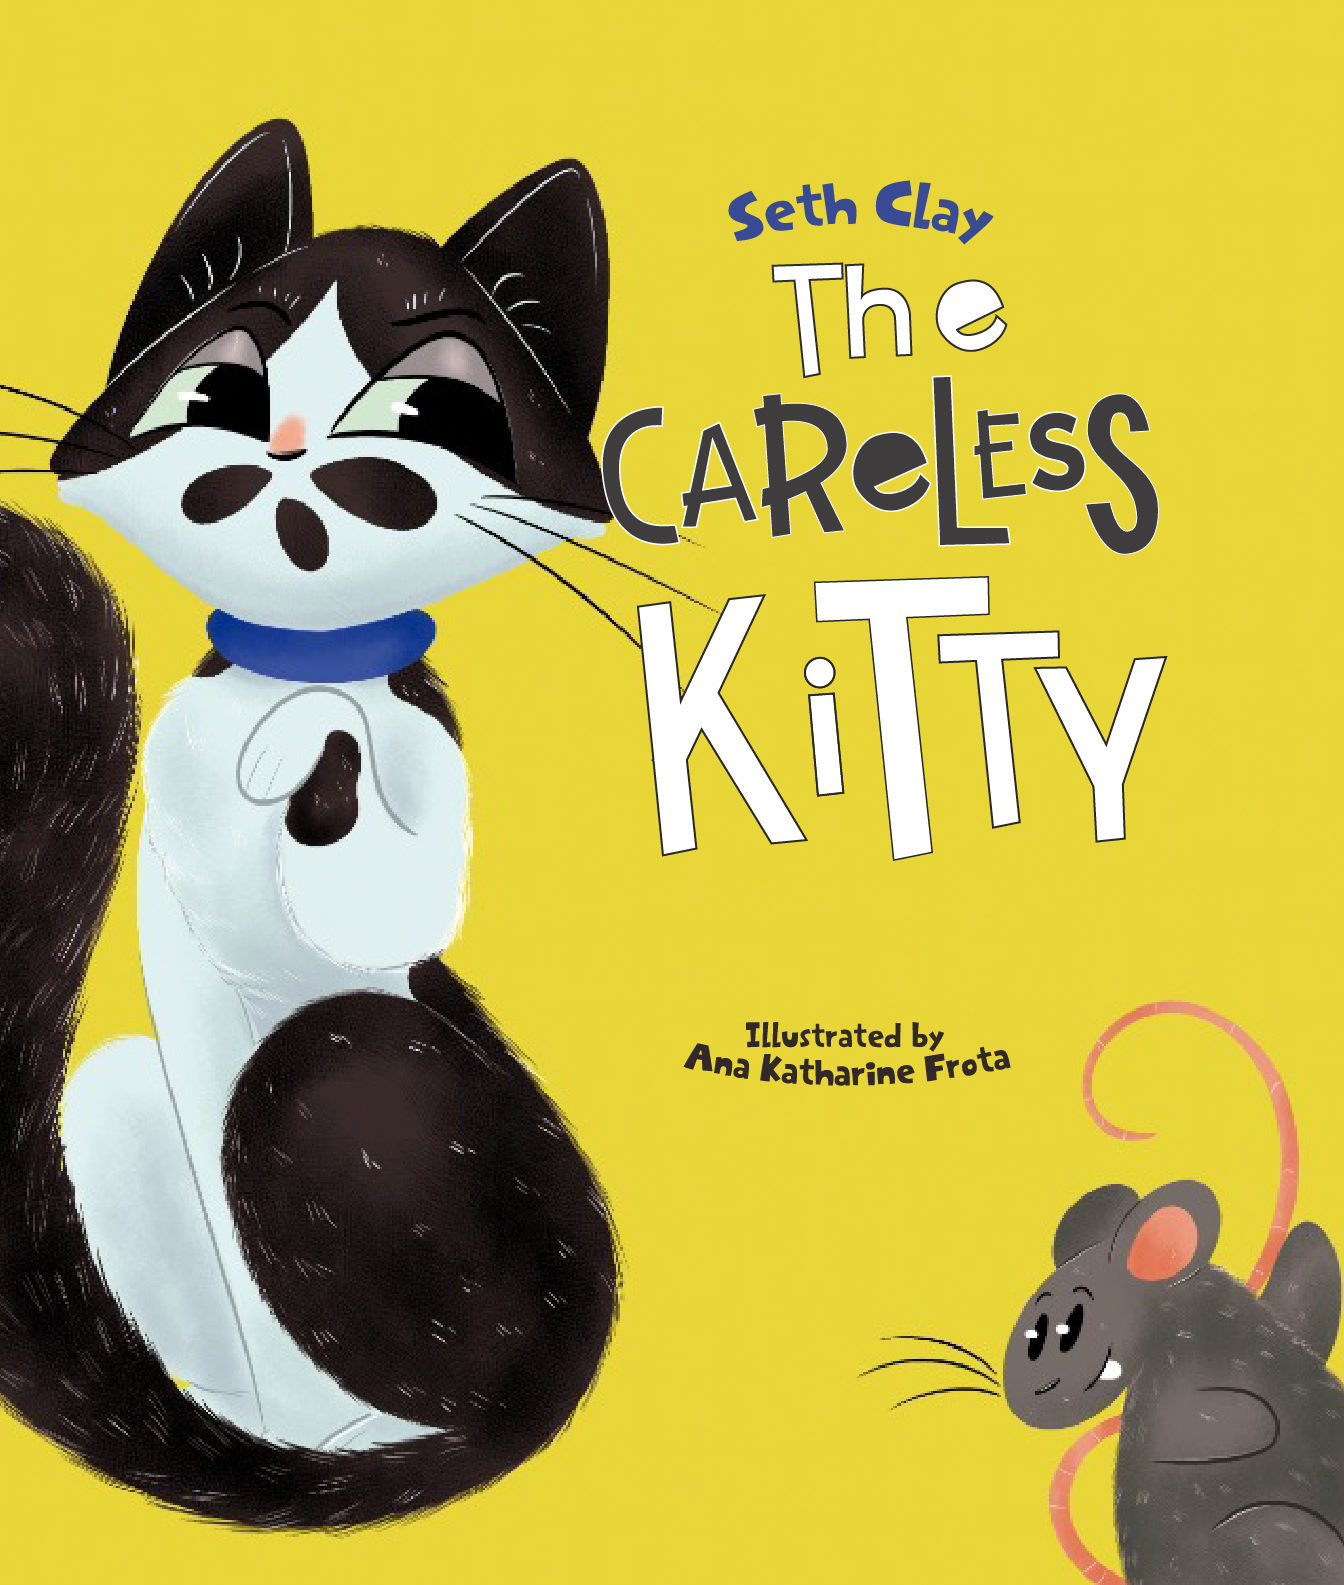 FREE: The Careless Kitty by Seth Clay